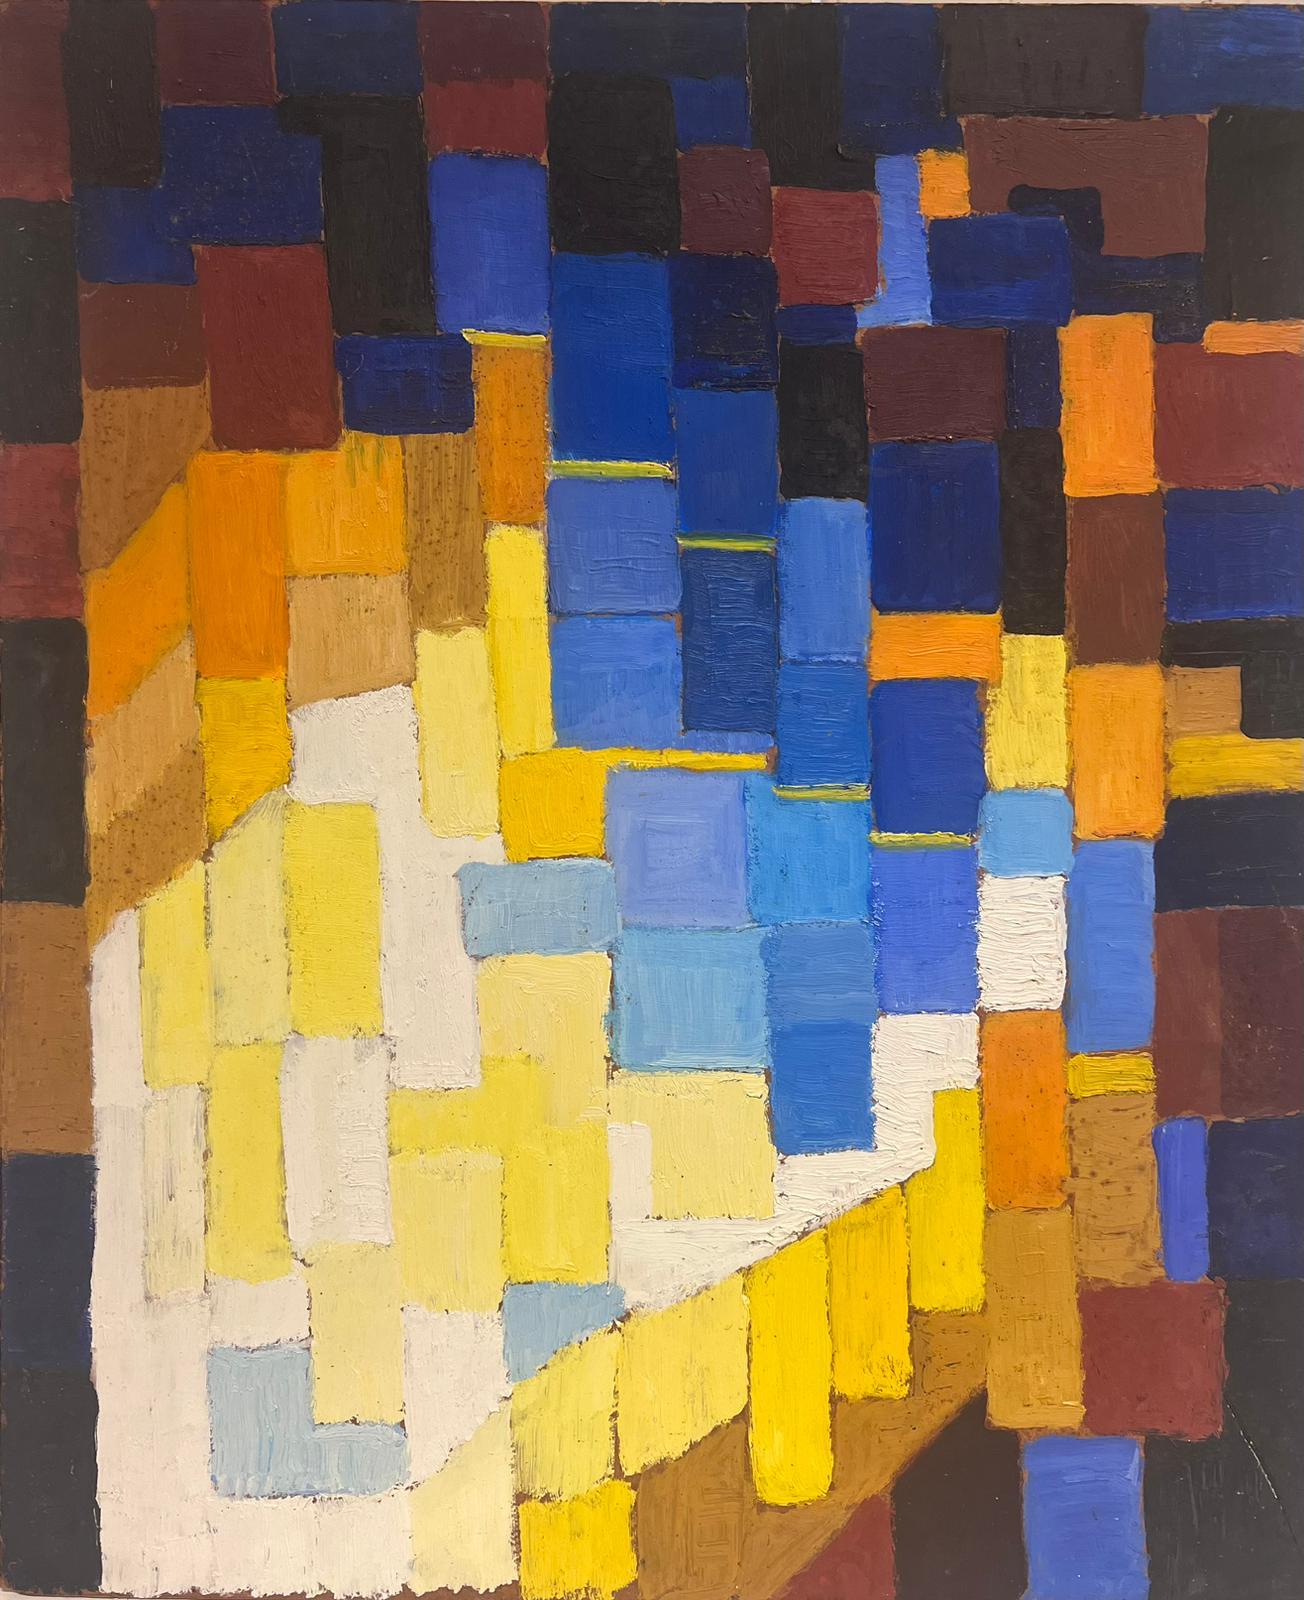 French School Abstract Painting - 20th Century French Cubist Oil Painting Blues Oranges Yellow & Beige Cubes